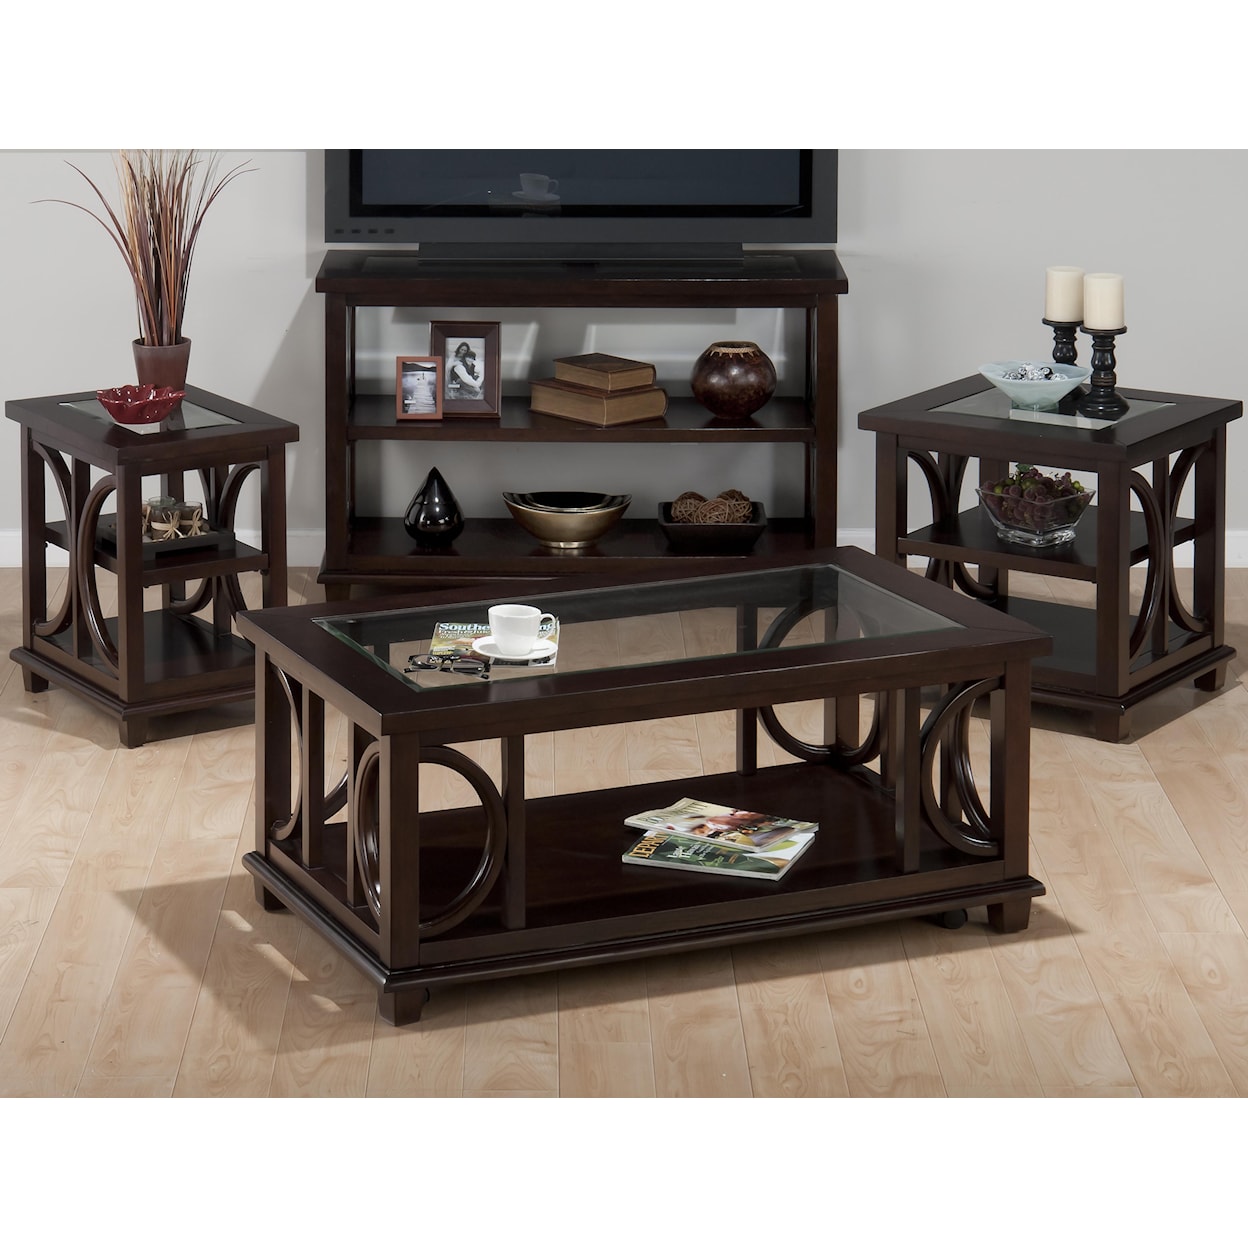 VFM Signature Panama Brown End Table w/ Glass Top